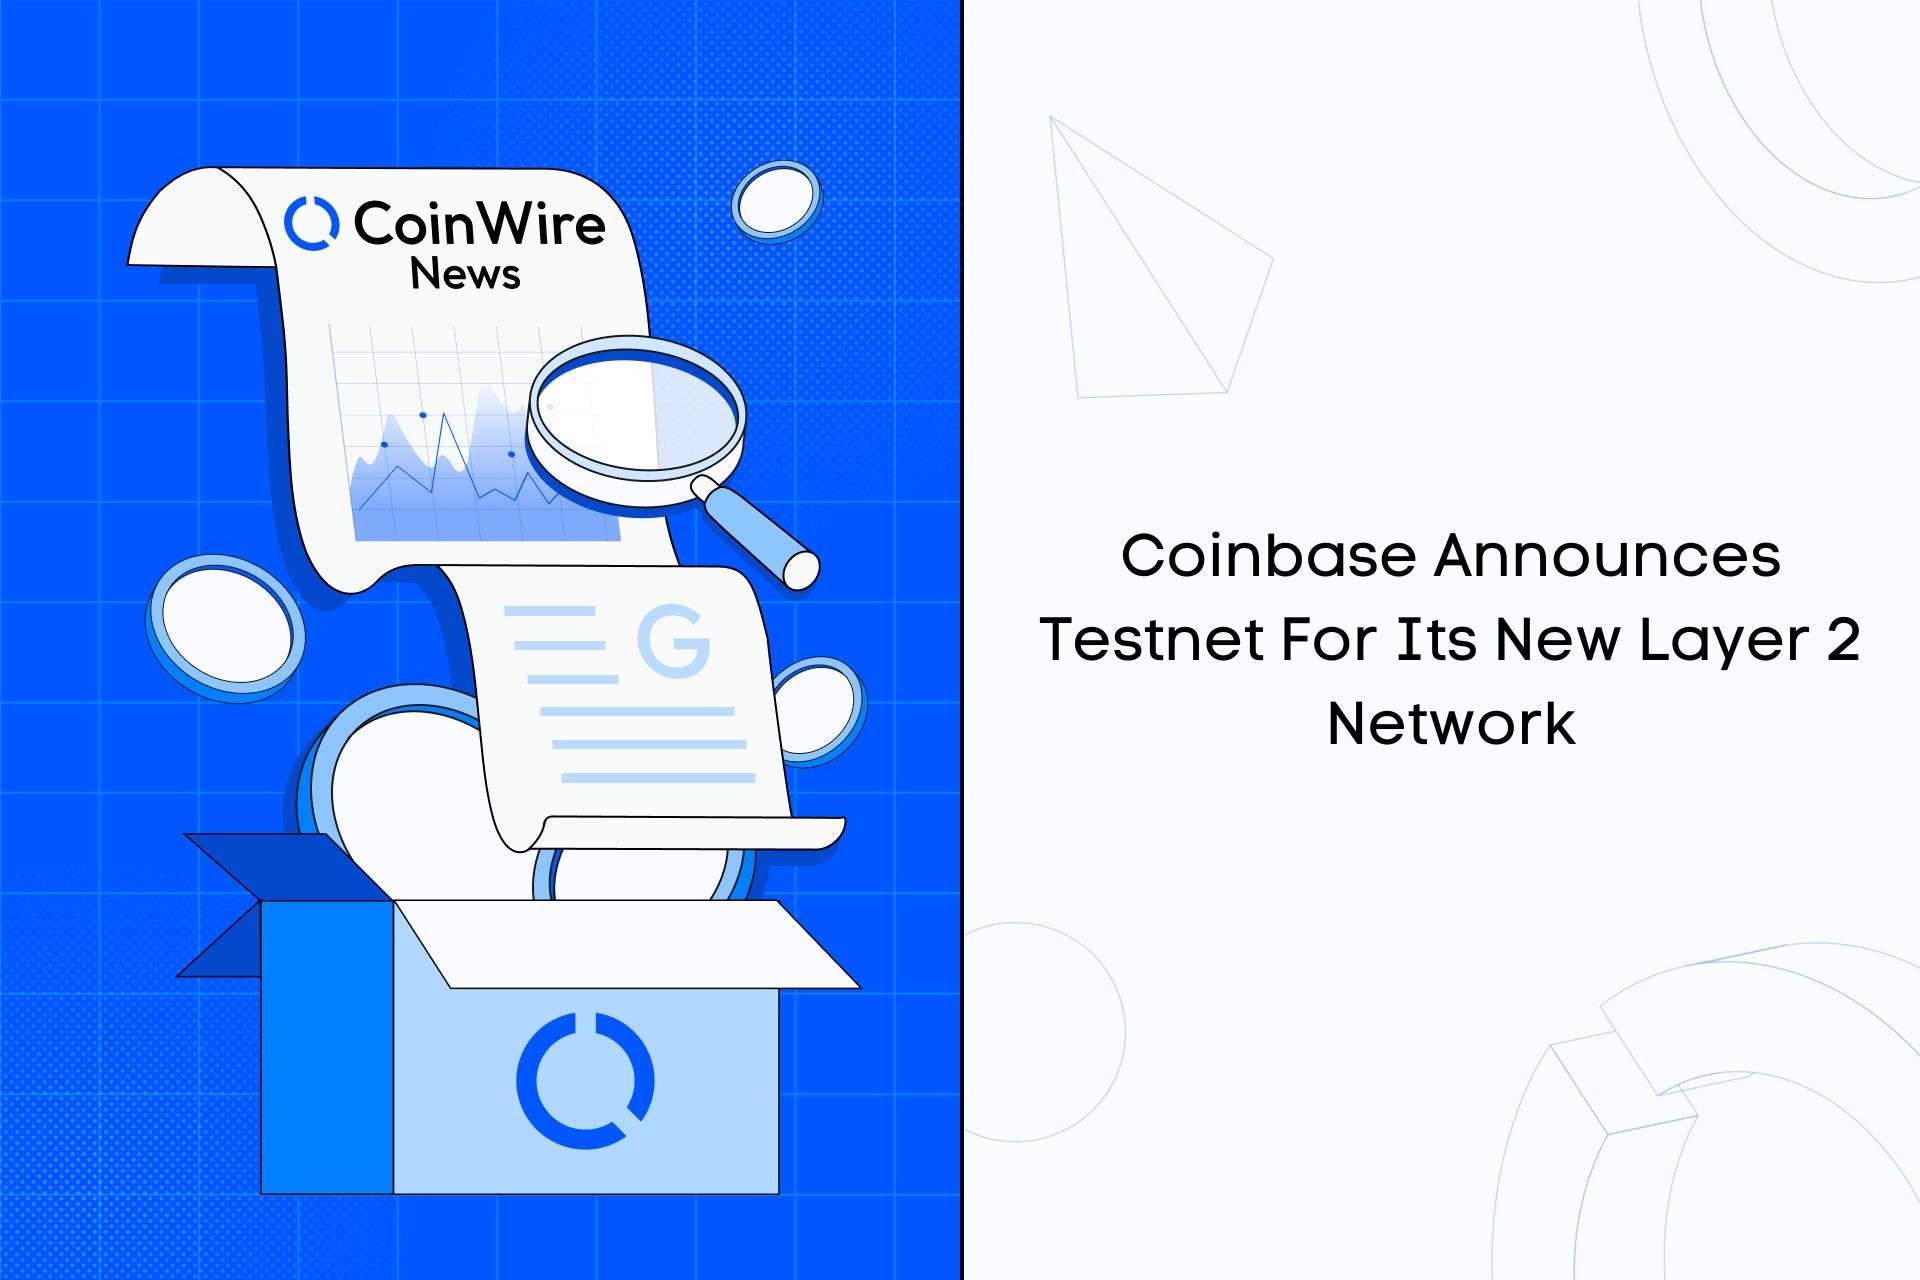 Coinbase Announces Testnet For Its New Layer 2 Network